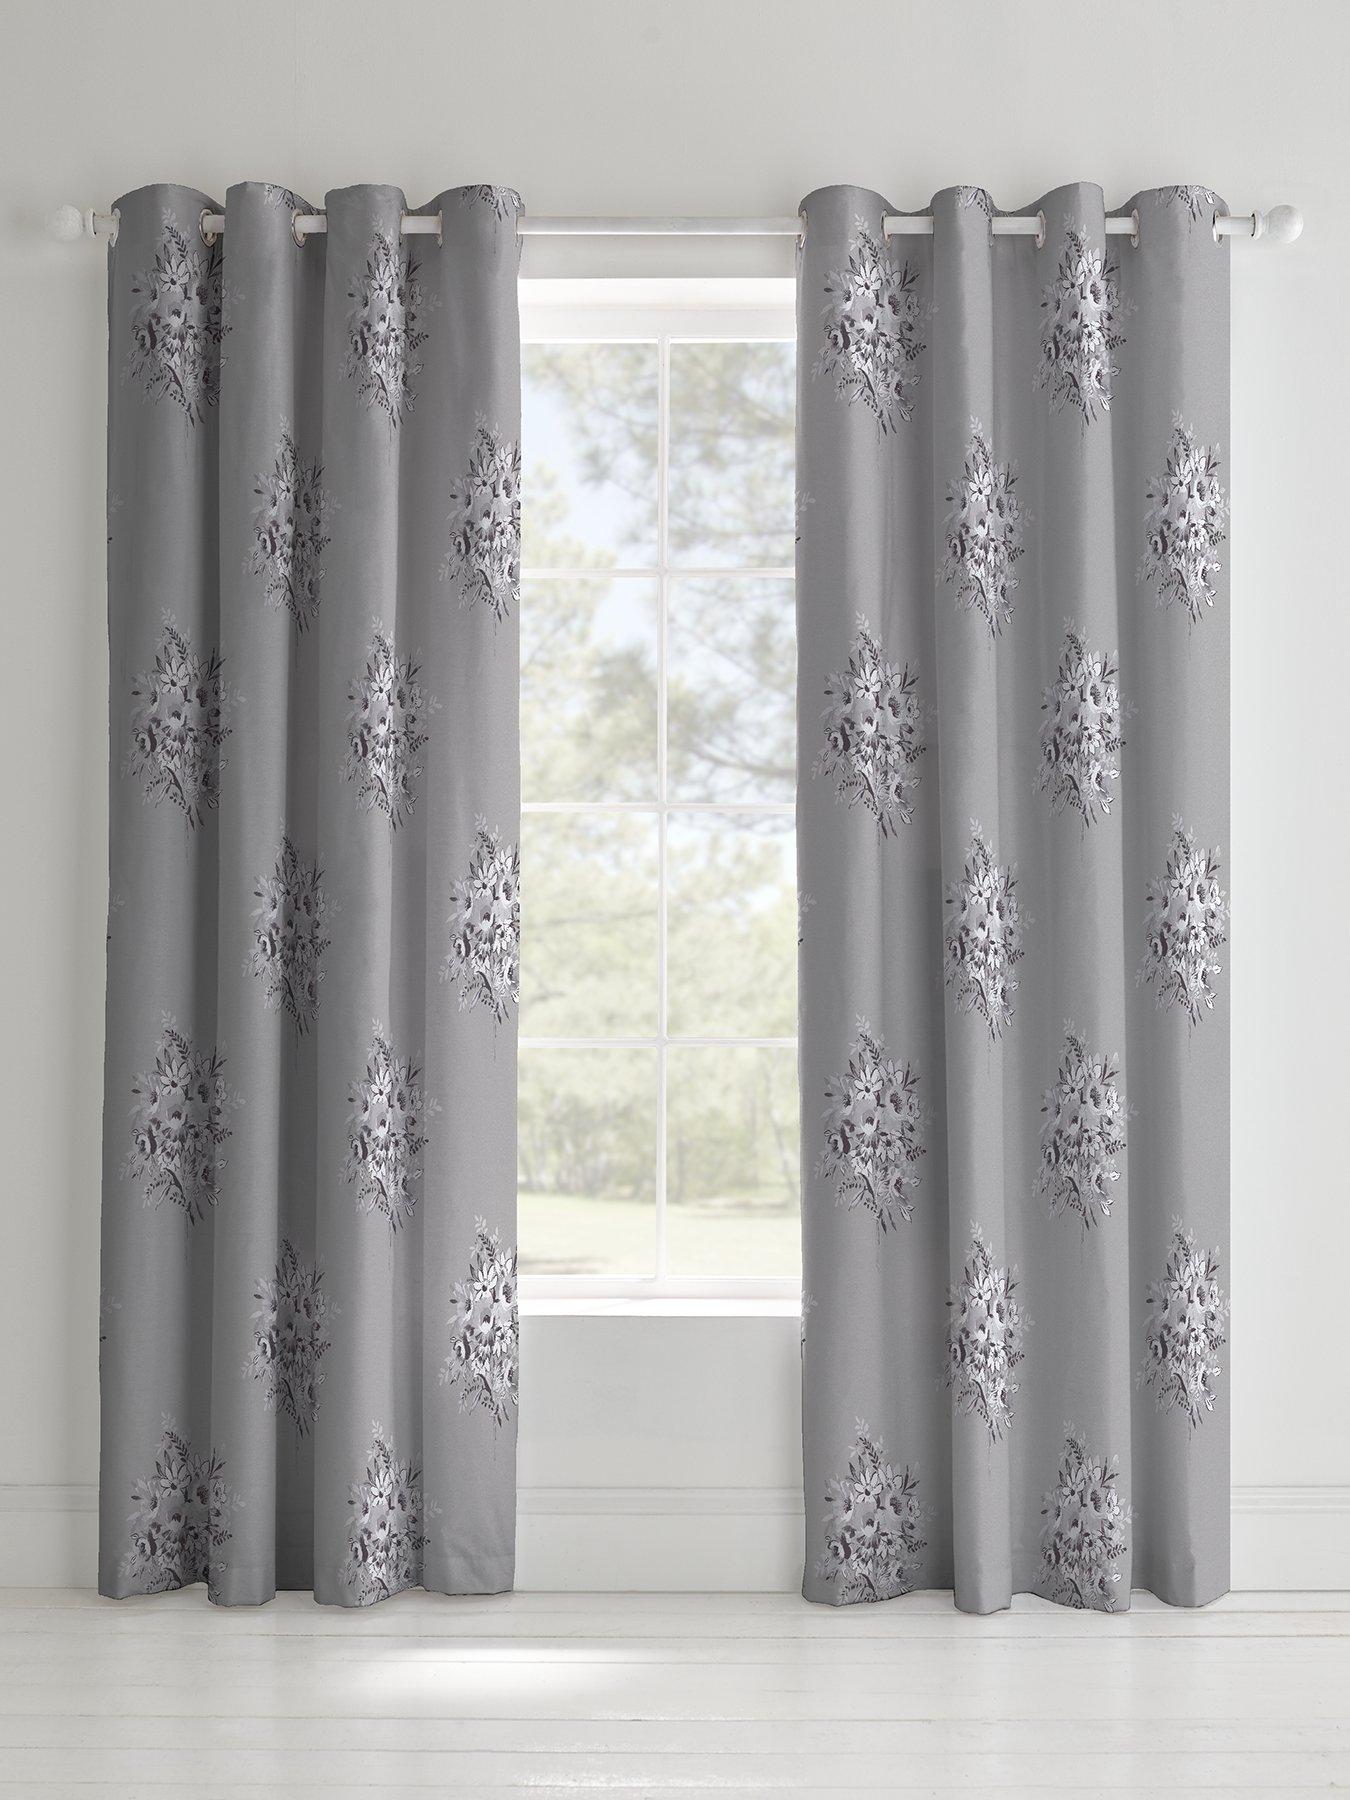 Fusion "Strata" DimOut/BlockOut Semi-Plain Fully Lined Eyelet Curtains Green 